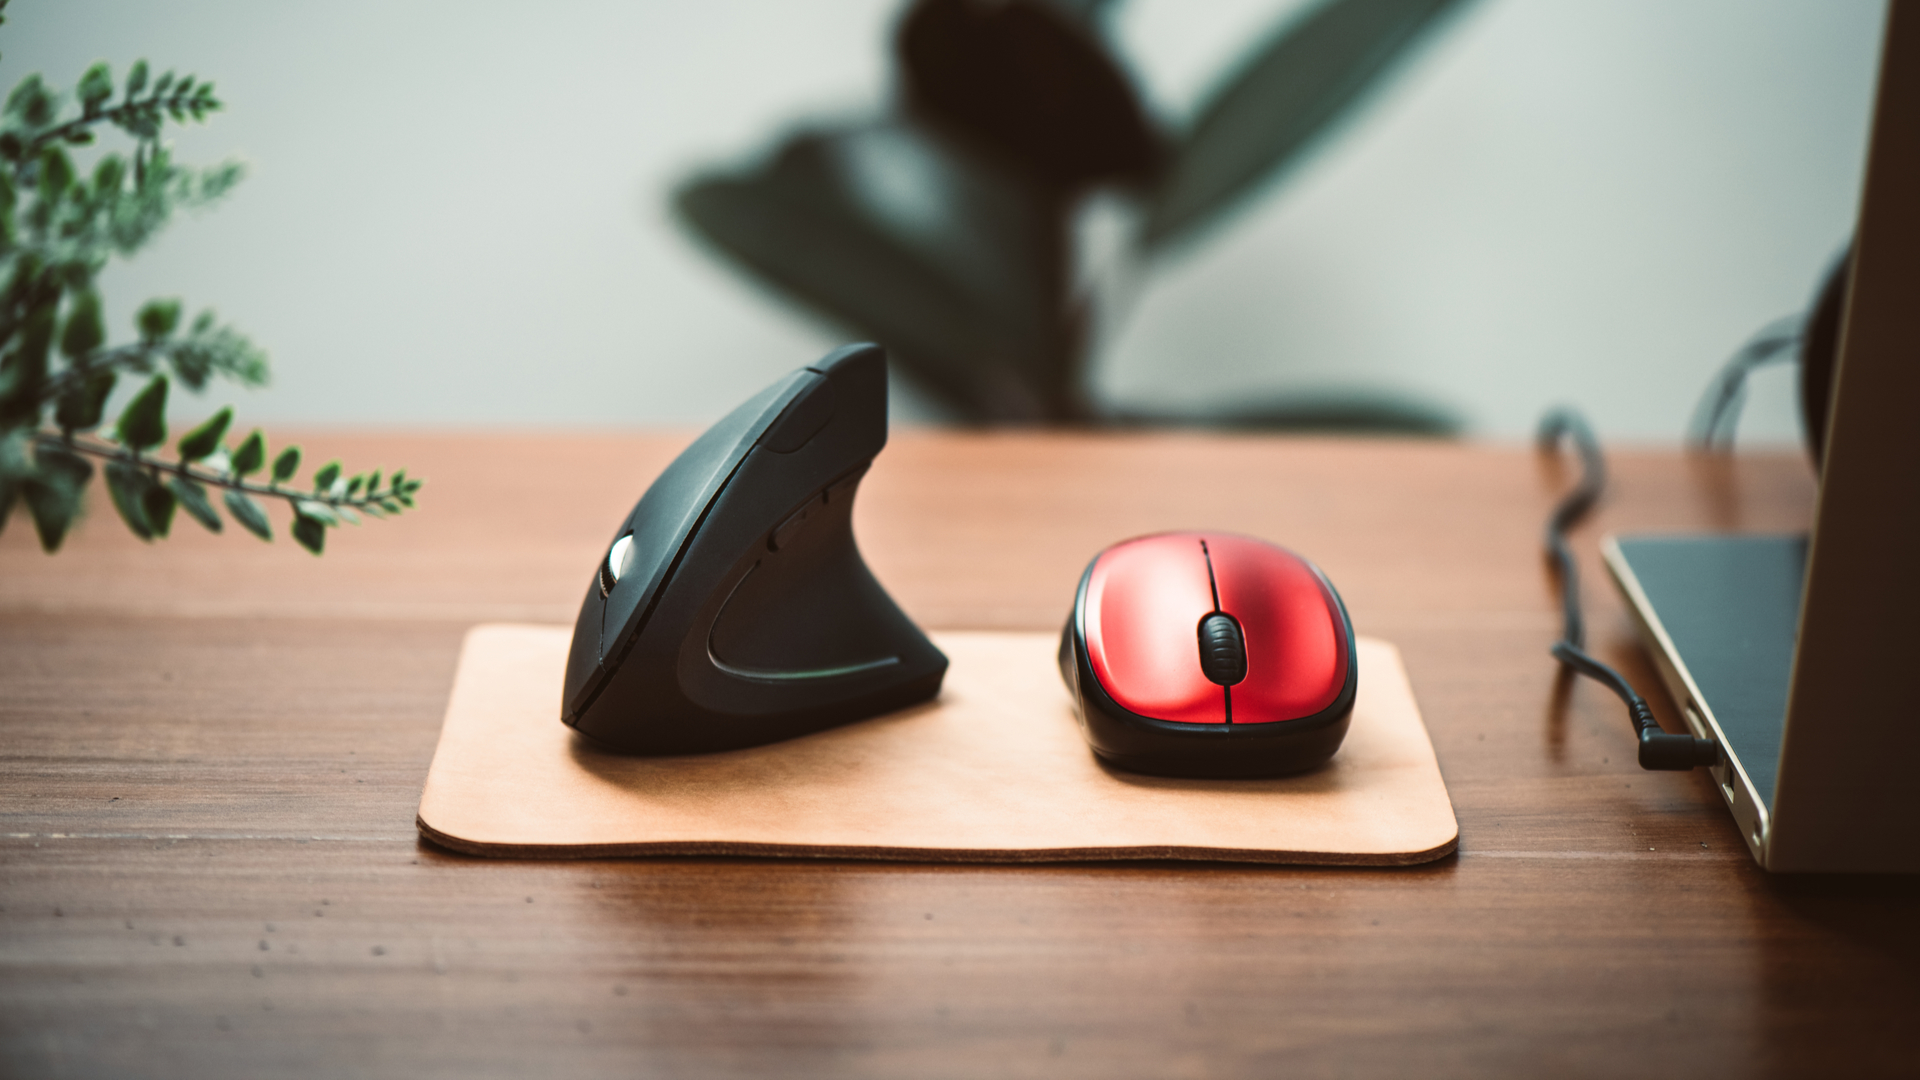 The Microsoft Sculpt Touch Mouse Review - A Great Scrolling